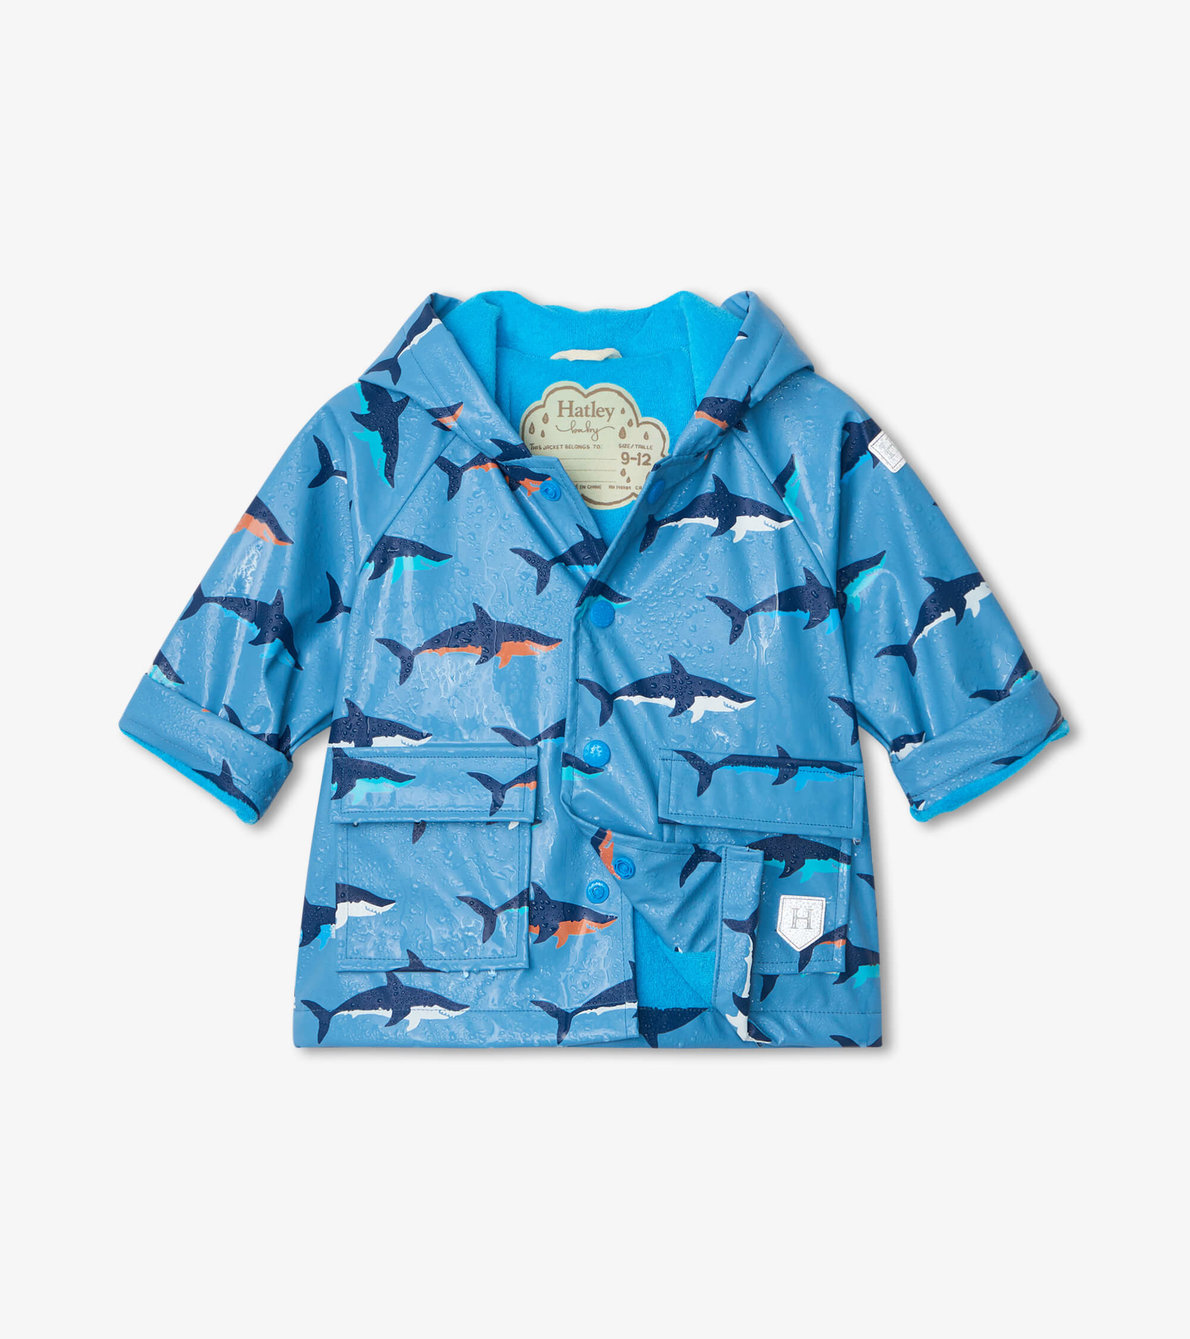 View larger image of Swimming Sharks Colour Changing Baby Raincoat